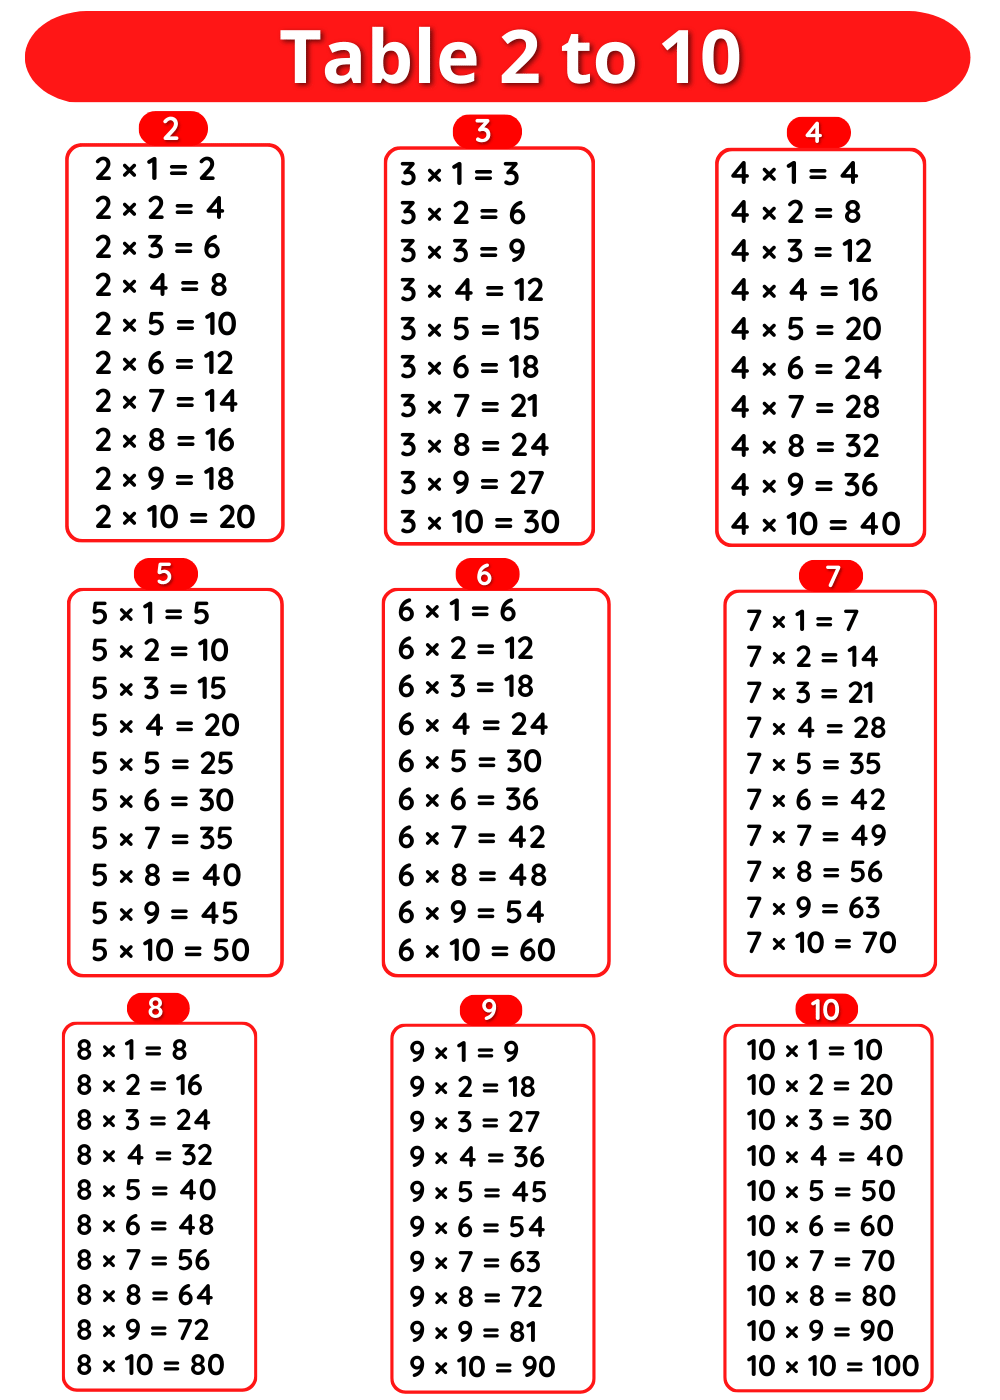 Table 2 to 10 – Multiplication Table 2 to 10 » Onlymyenglish.com